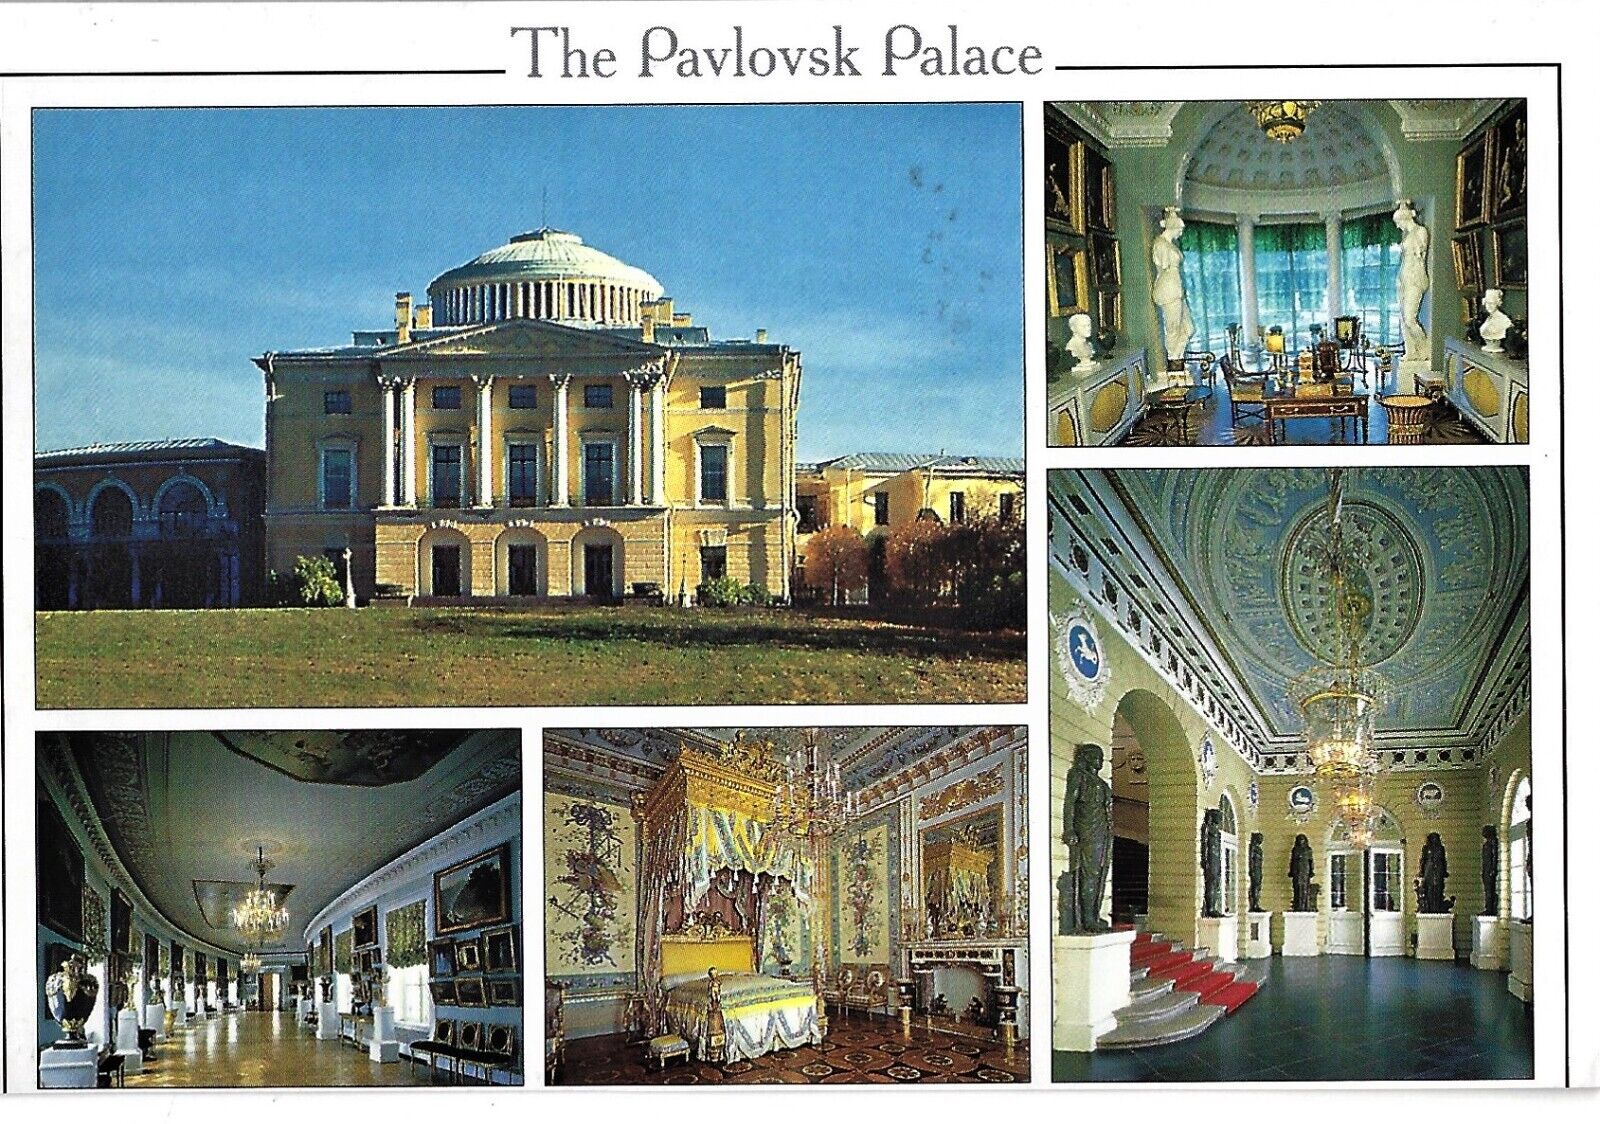 2000 Postcard, Pavlovsk Palace, unposted, color, 5 views, printed in Russian Eng